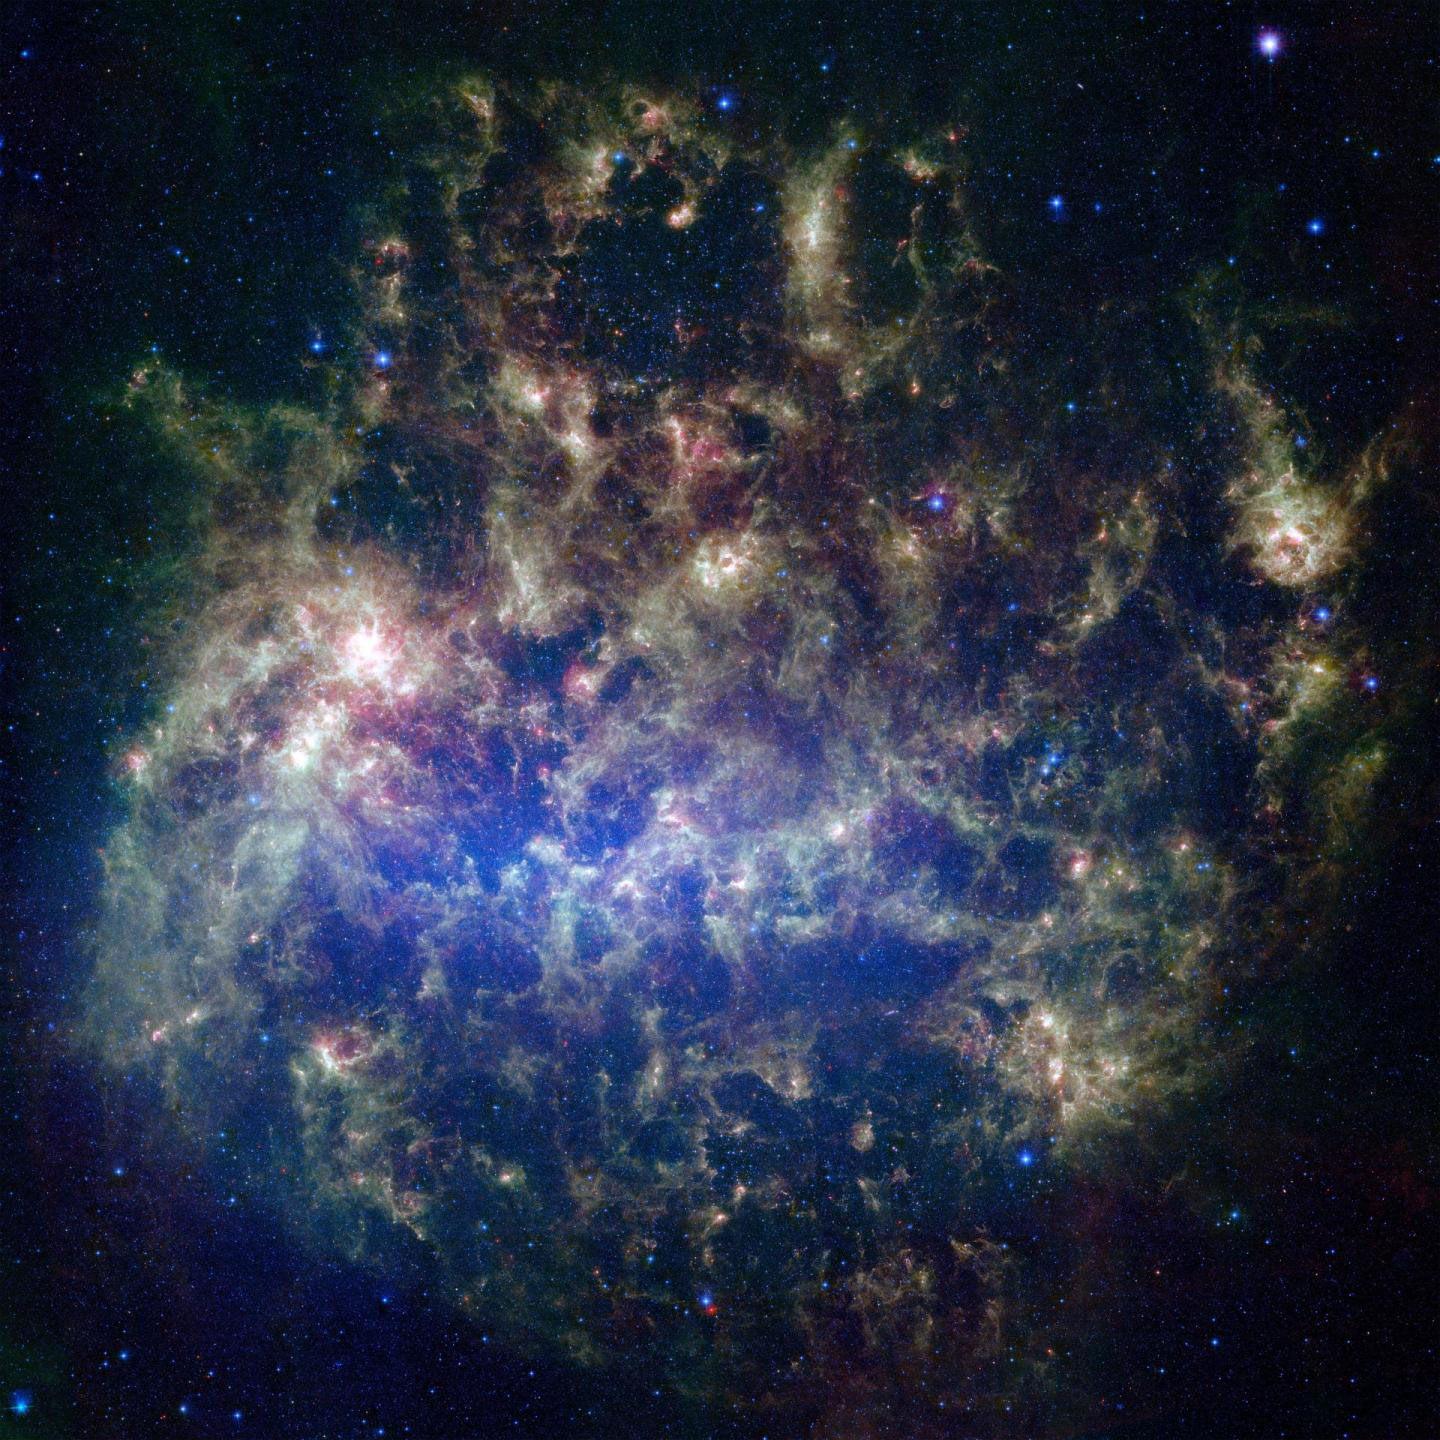 This vibrant image from NASA's Spitzer Space Telescope shows the Large Magellanic Cloud, a satellite galaxy to our own Milky Way galaxy.  CREDIT NASA/JPL-Caltech/STScI